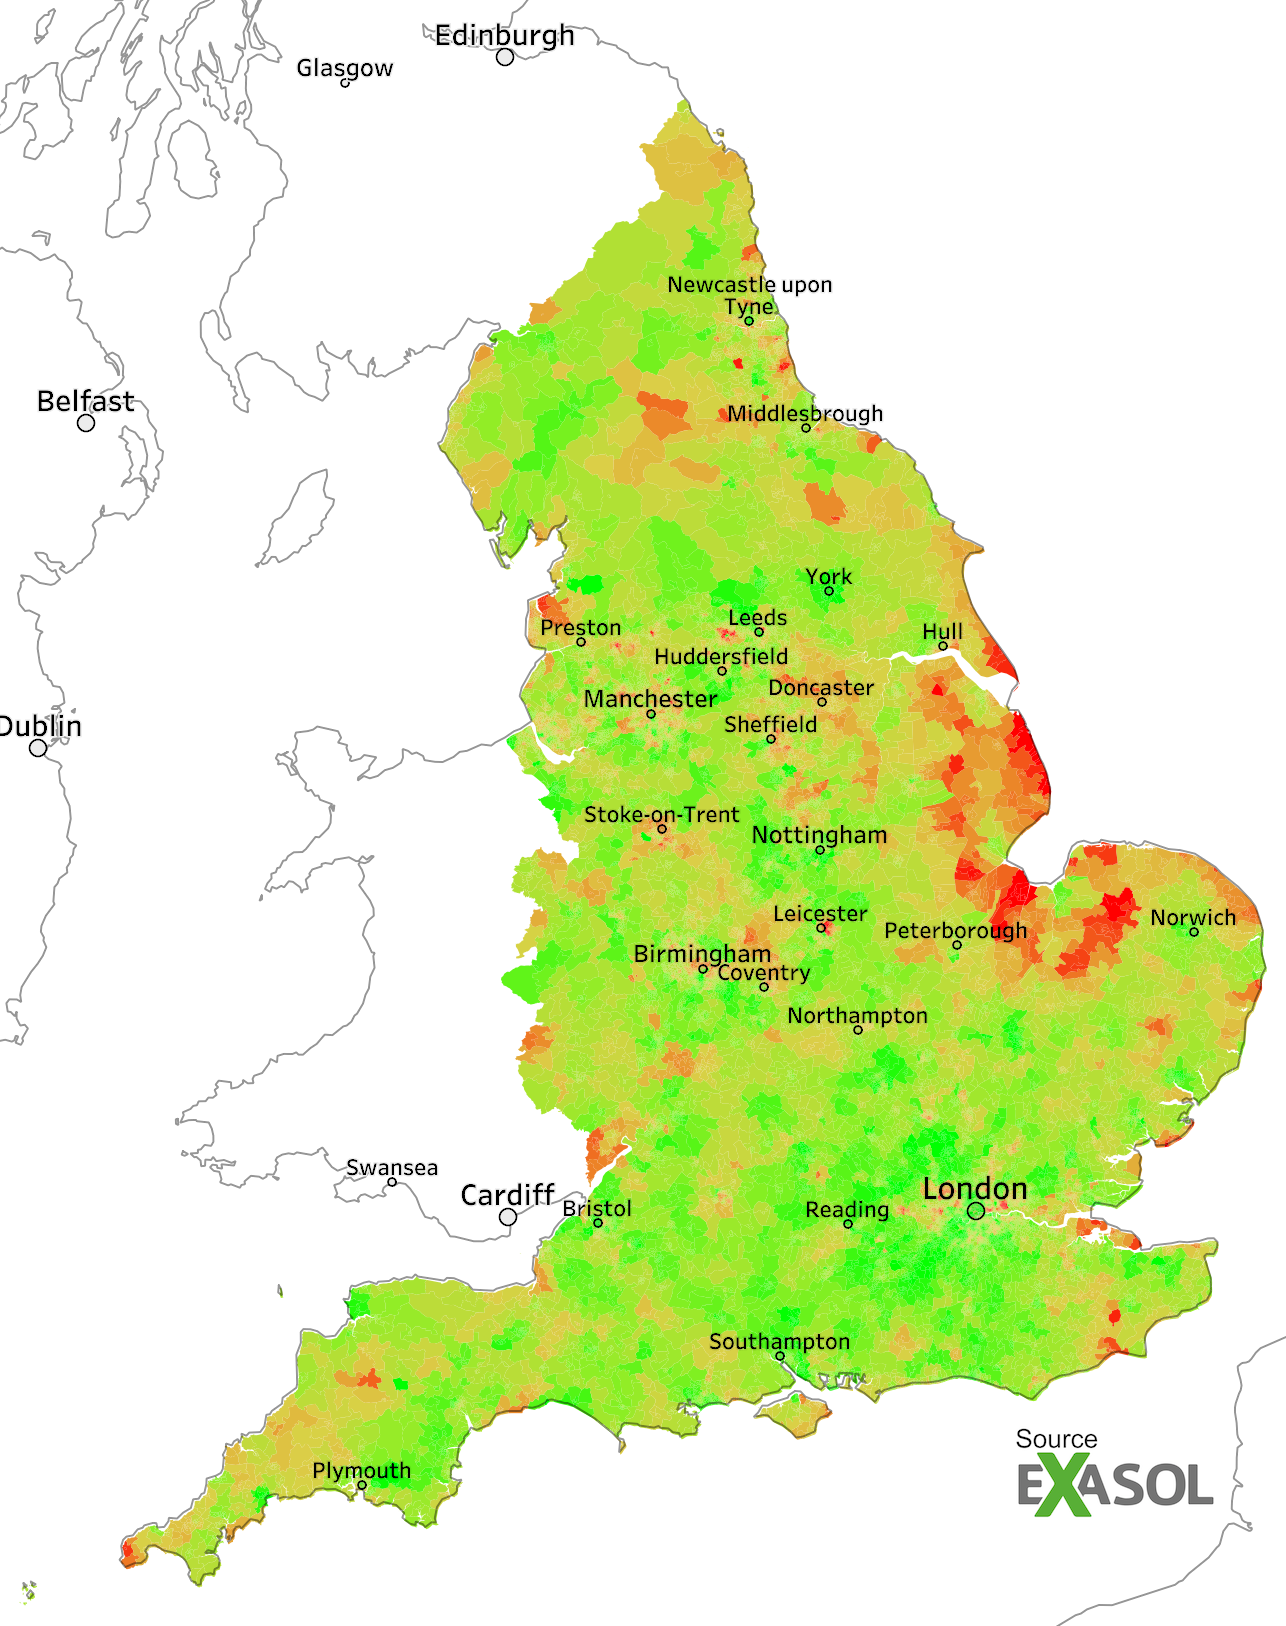 A heat map showing the rates of prescriptions for type 2 diabetes in 2011